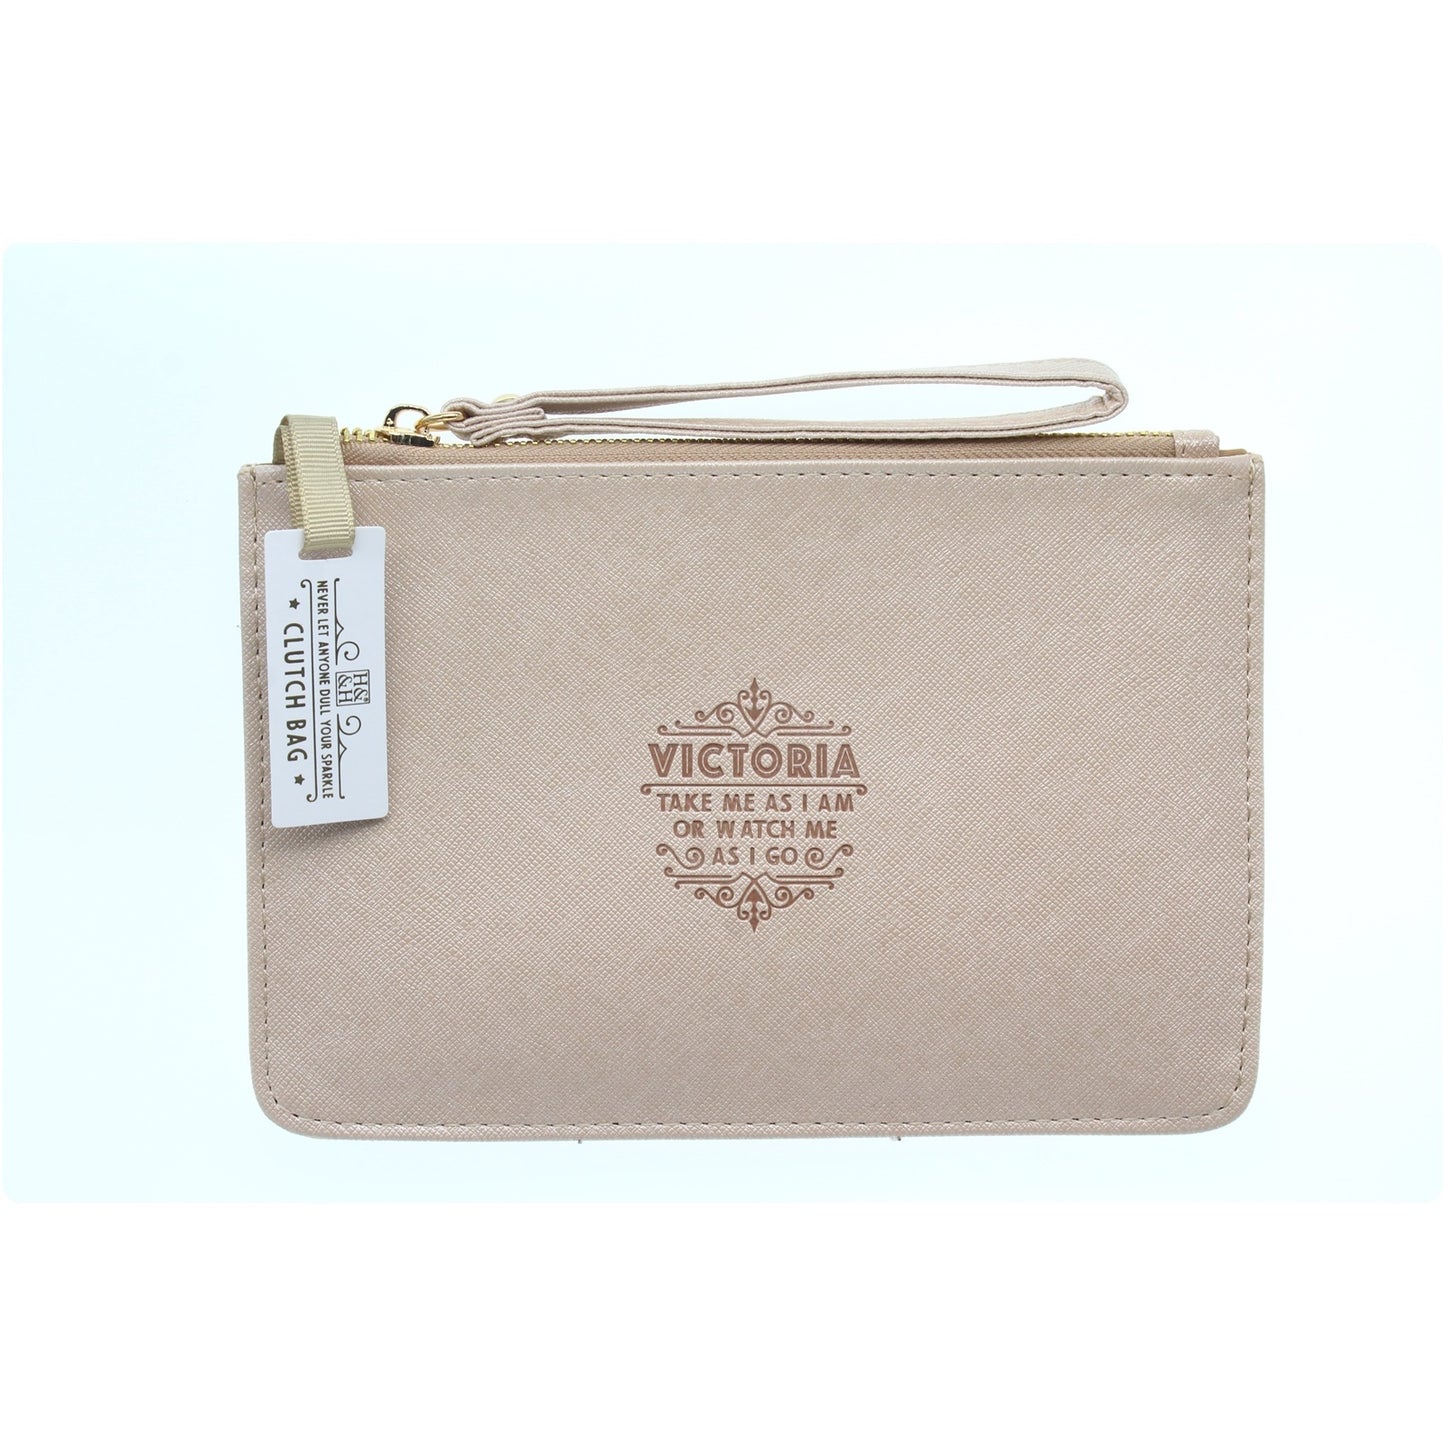 Clutch Bag With Handle & Embossed Text "Victoria"